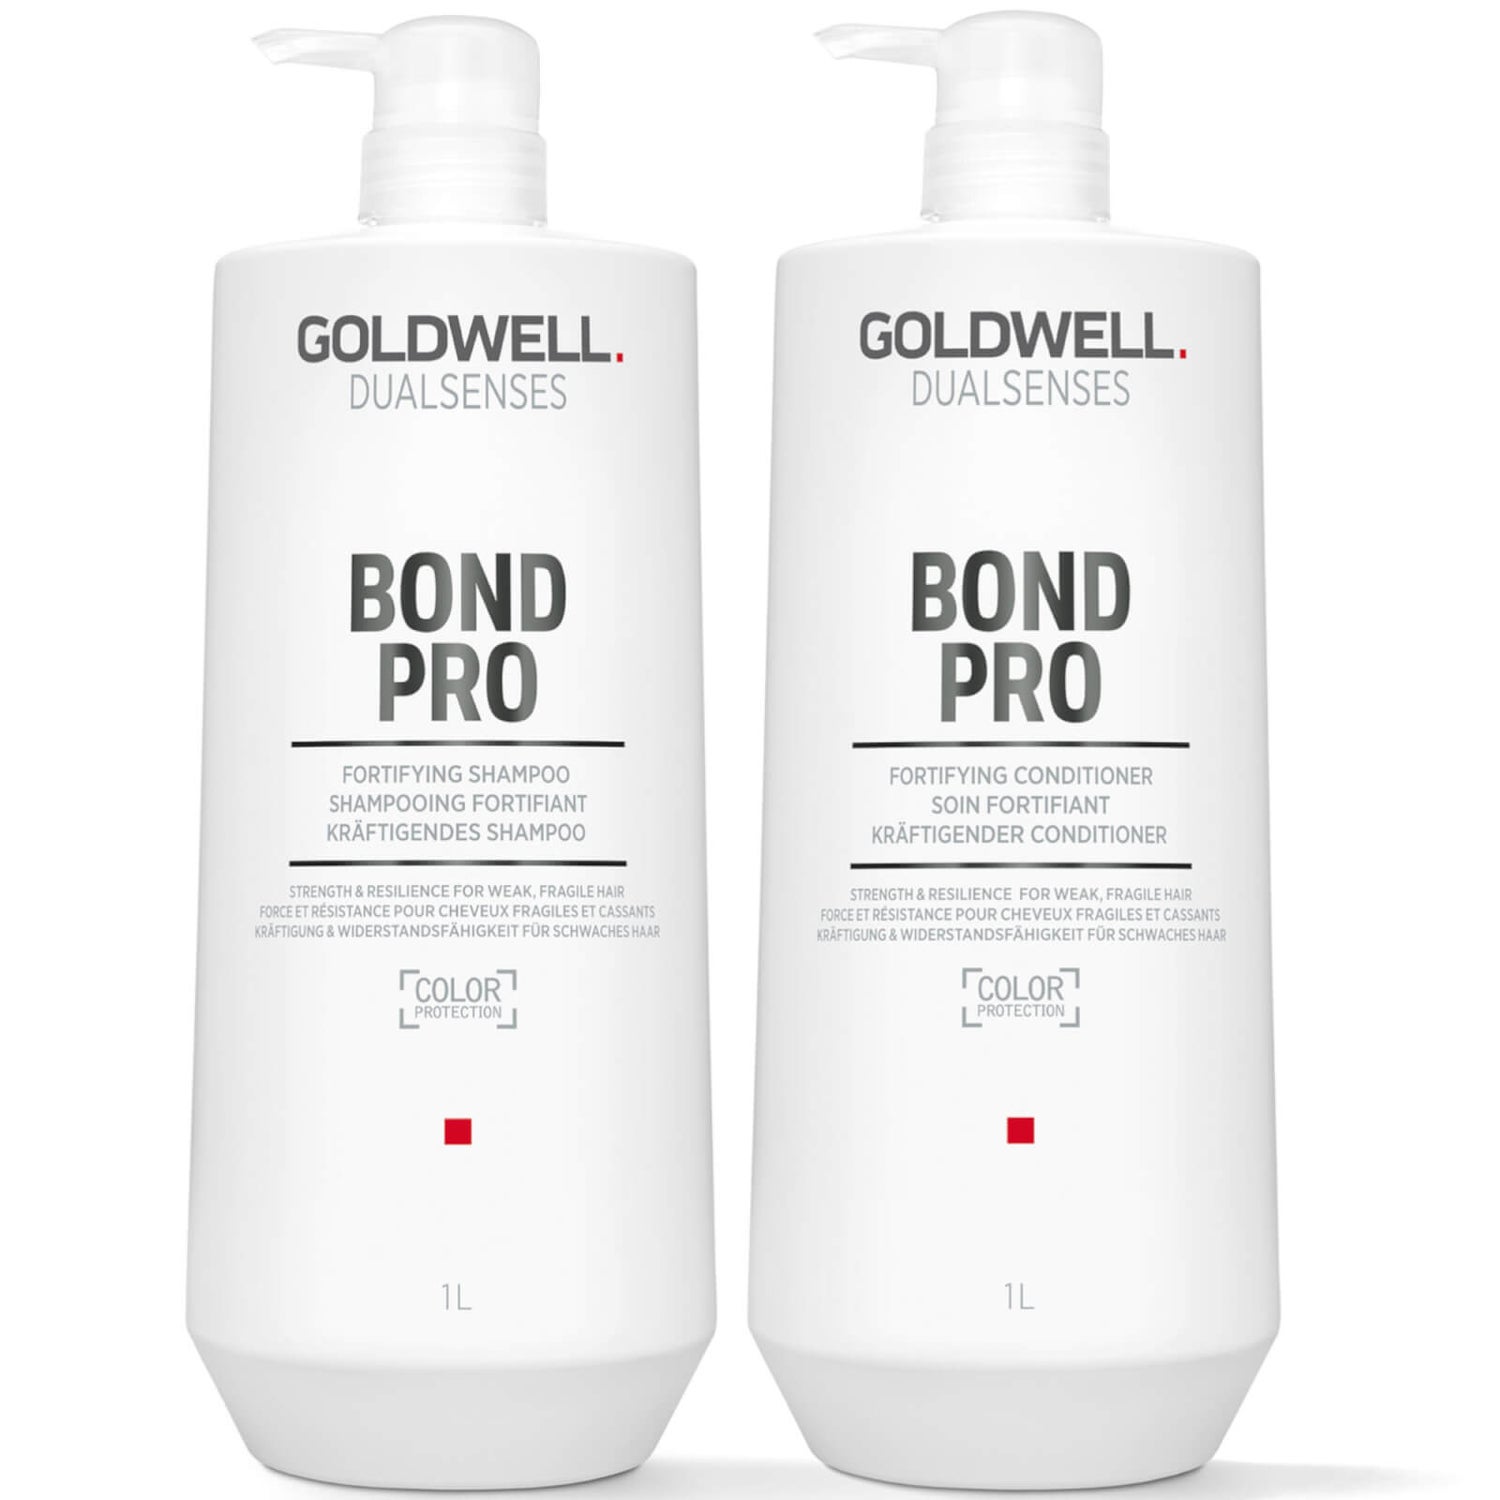 Goldwell Dualsenses Bond Pro Shampoo and Conditioner 1L Duo For Weak, Damaged Hair (Worth £128.20)